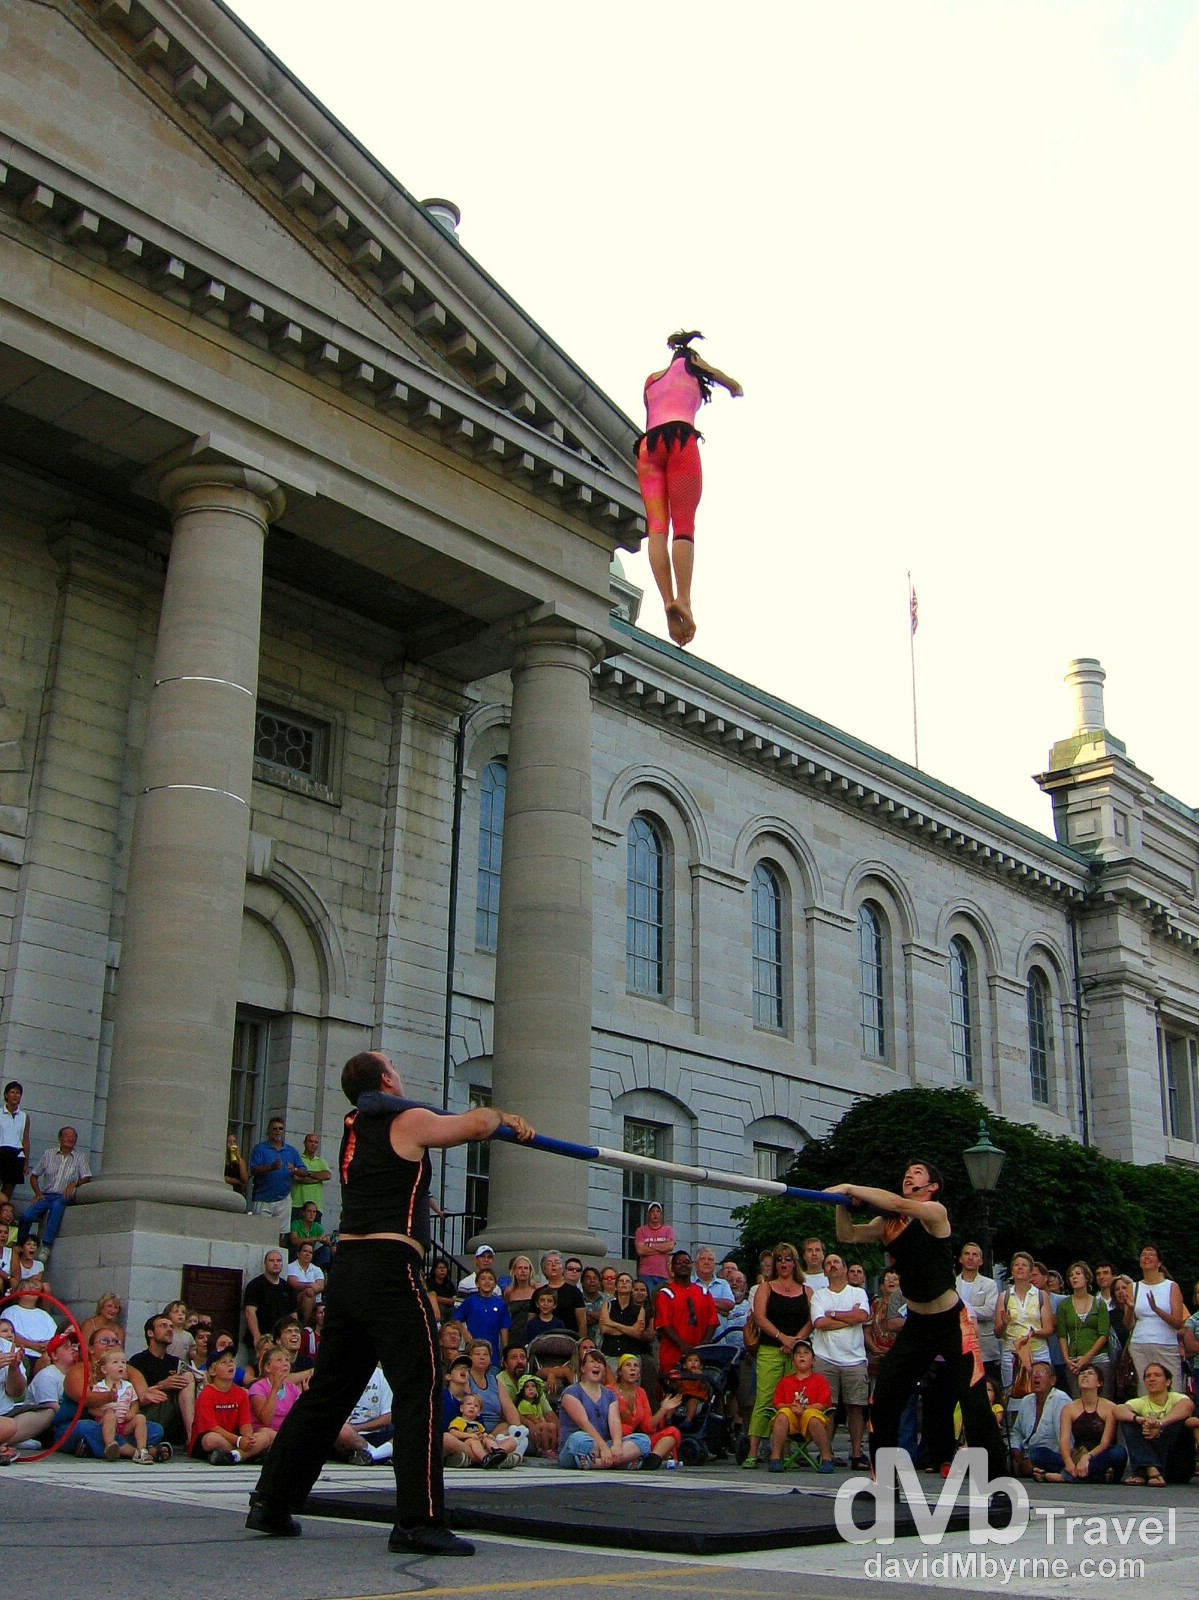 Buskerfest performers wow the crowds in front of City Hall in Kingston, Ontario, Canada. July 13th, 2006. 